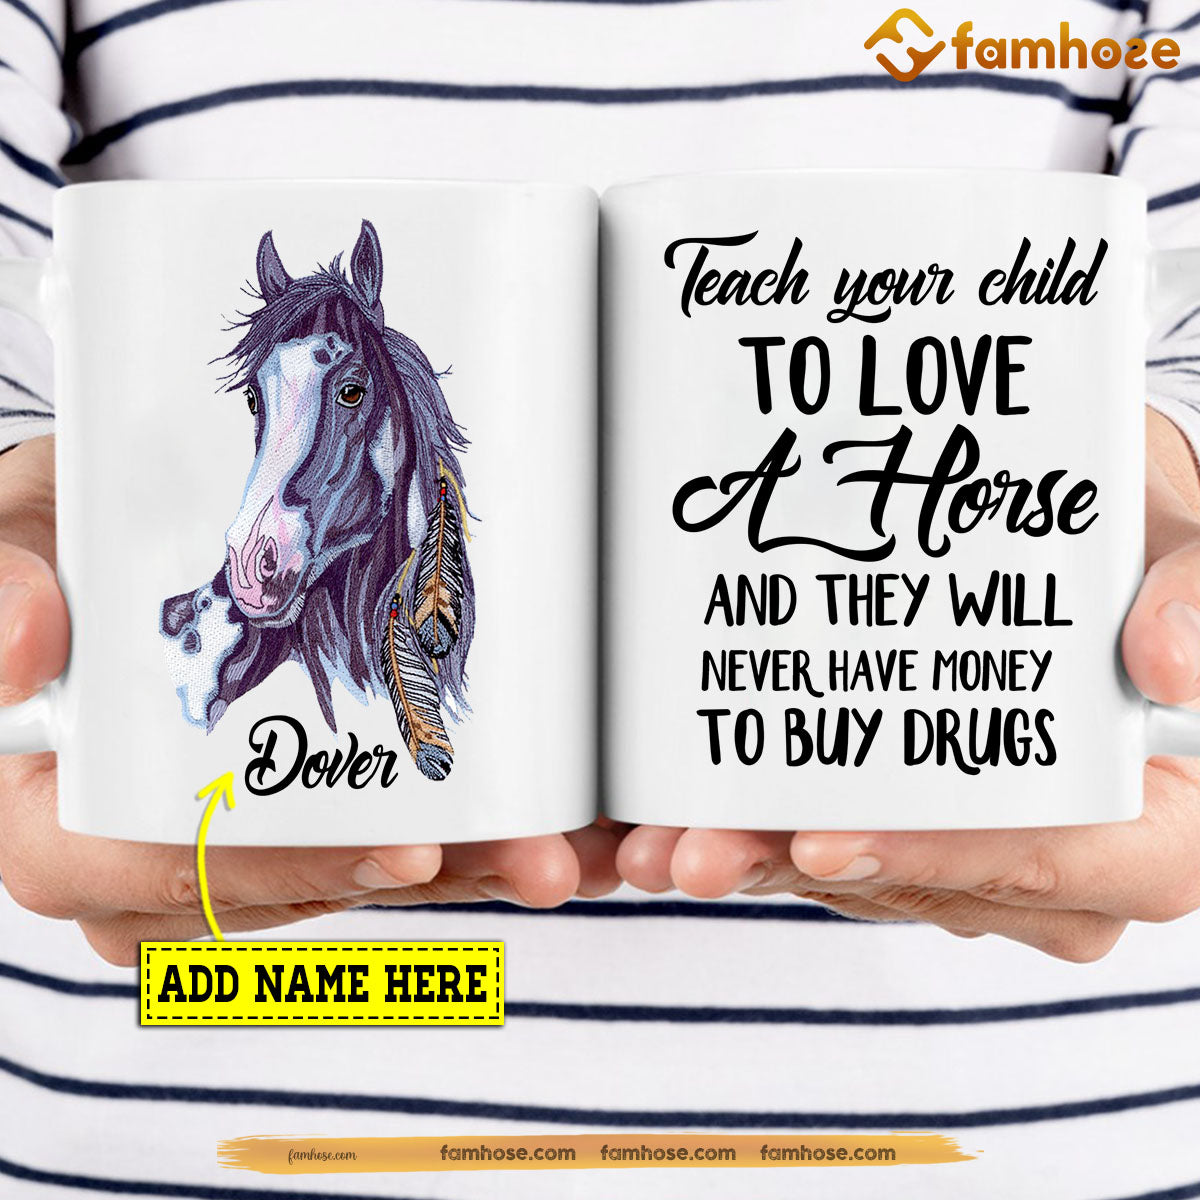 Personalized Horse Mug, Teach Your Child To Love A Horse Mug, Cups Gift For Horse Lovers, Horse Owner